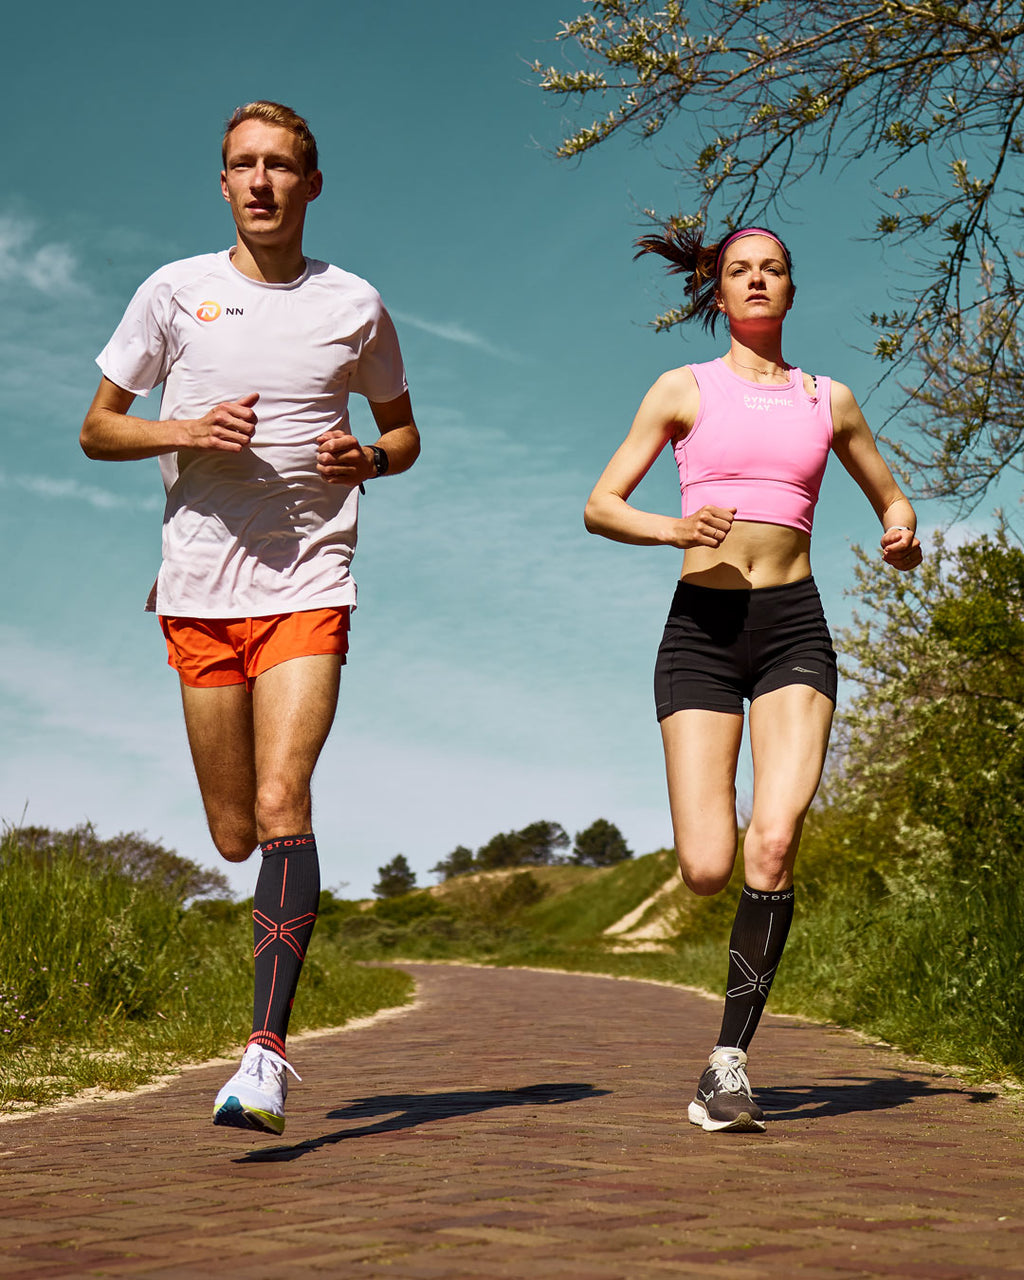 Bjorn Koreman and Jill Holterman running side by side in orange and black running shorts 